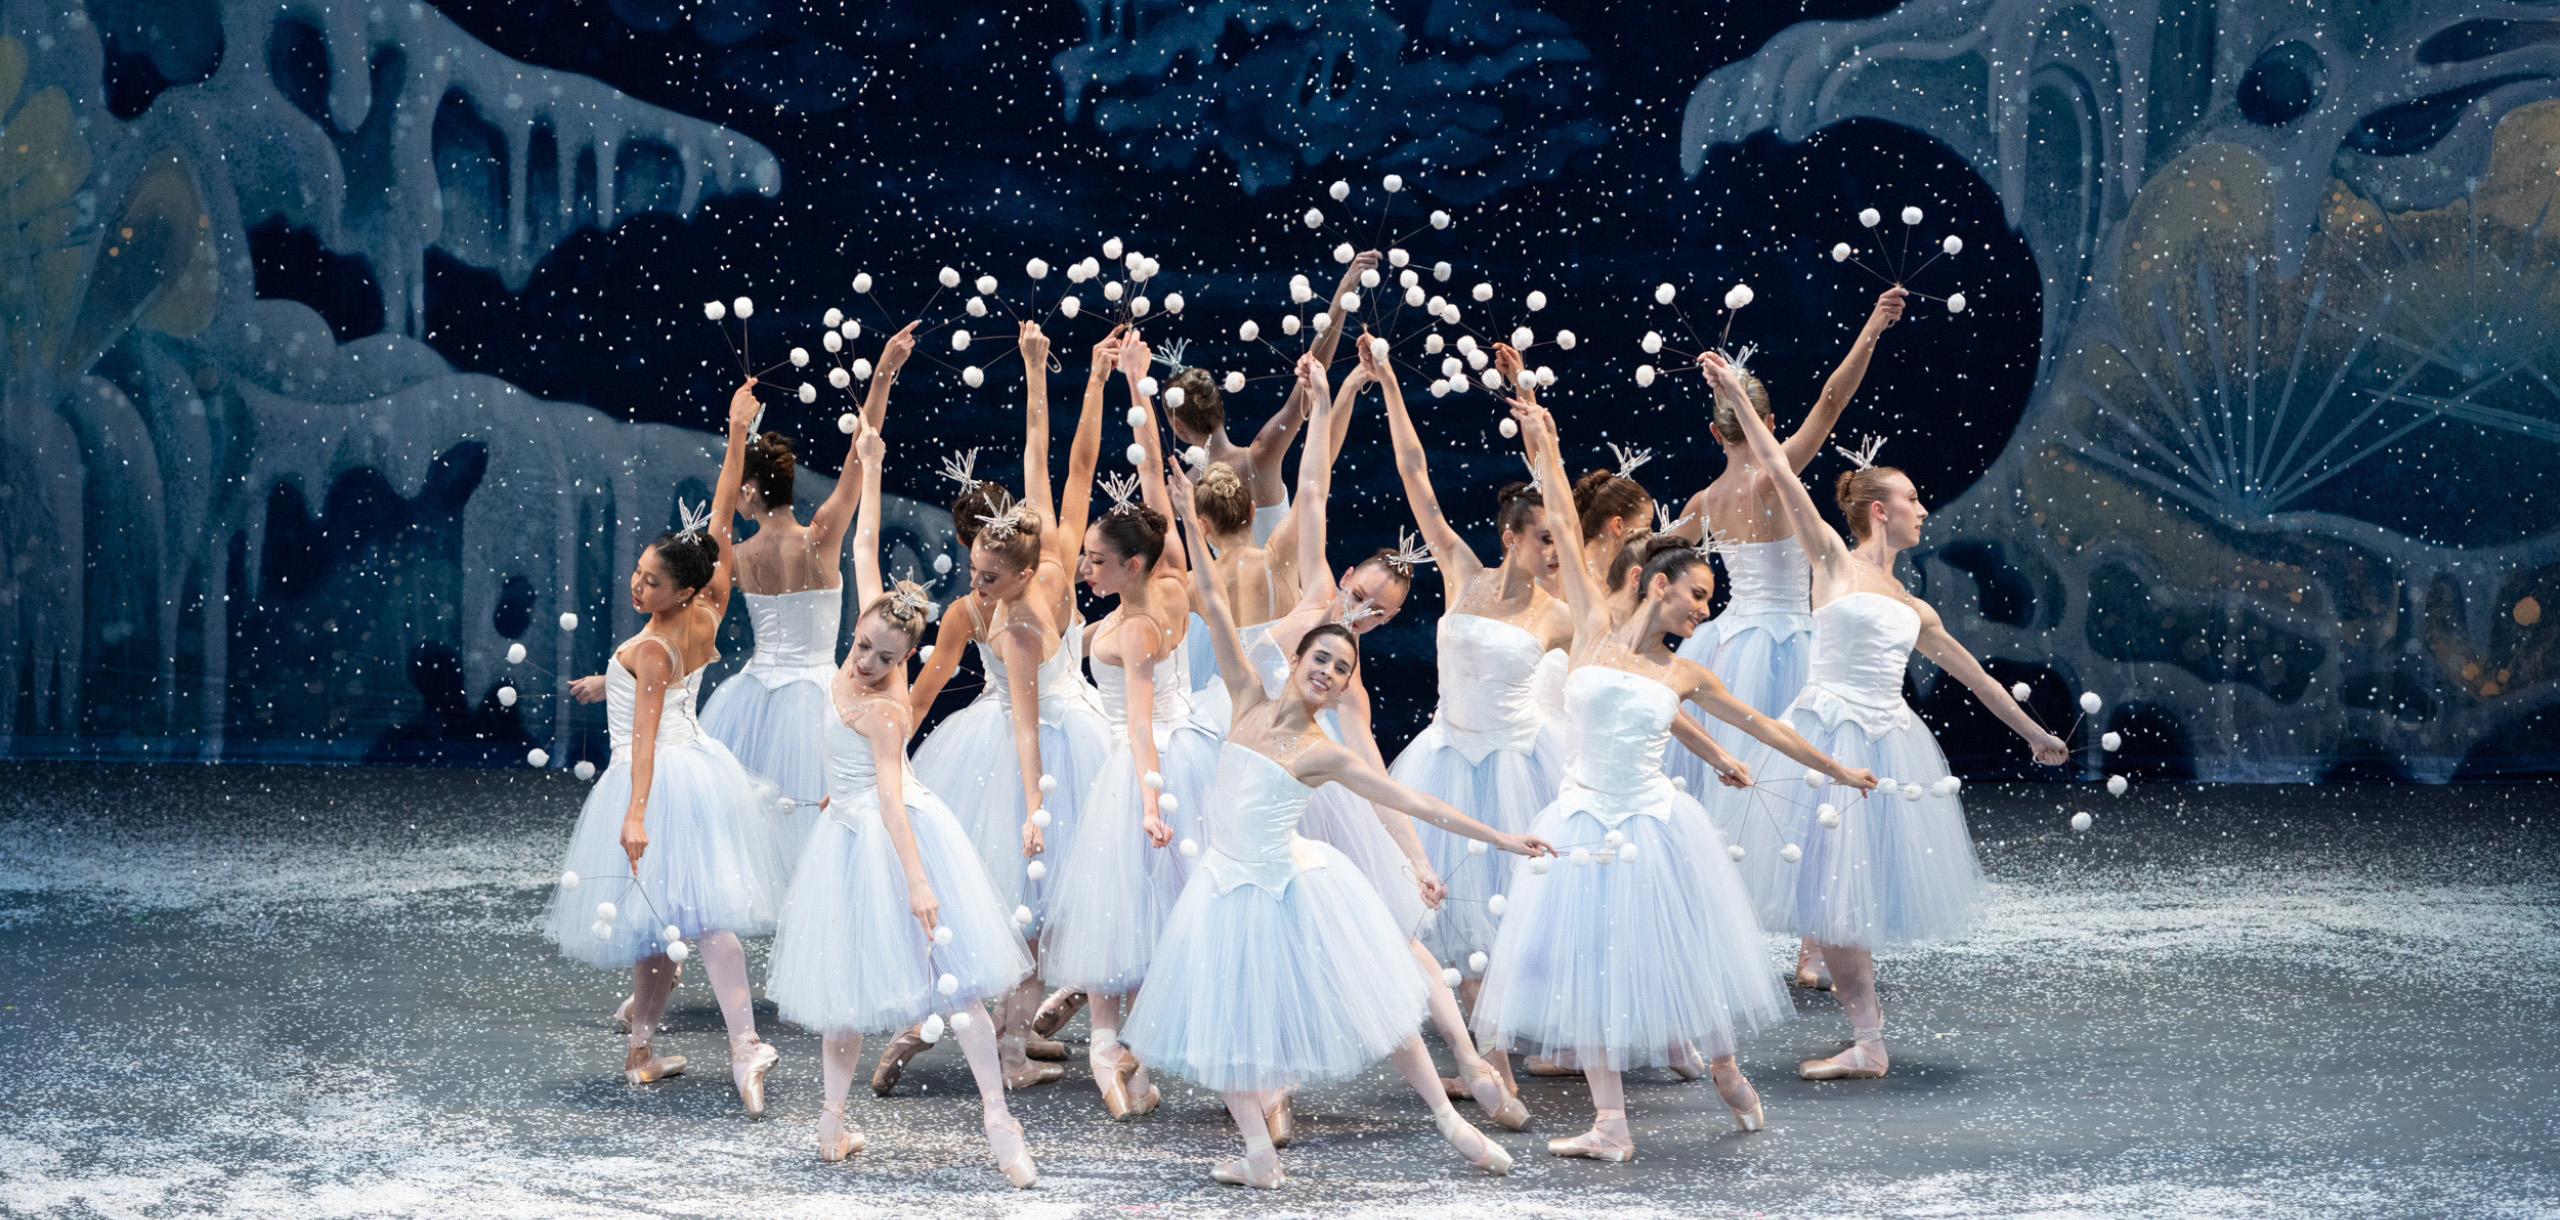 Miami City Ballet’s dancers in white tutus performing in George Balanchine’s The Nutcracker®